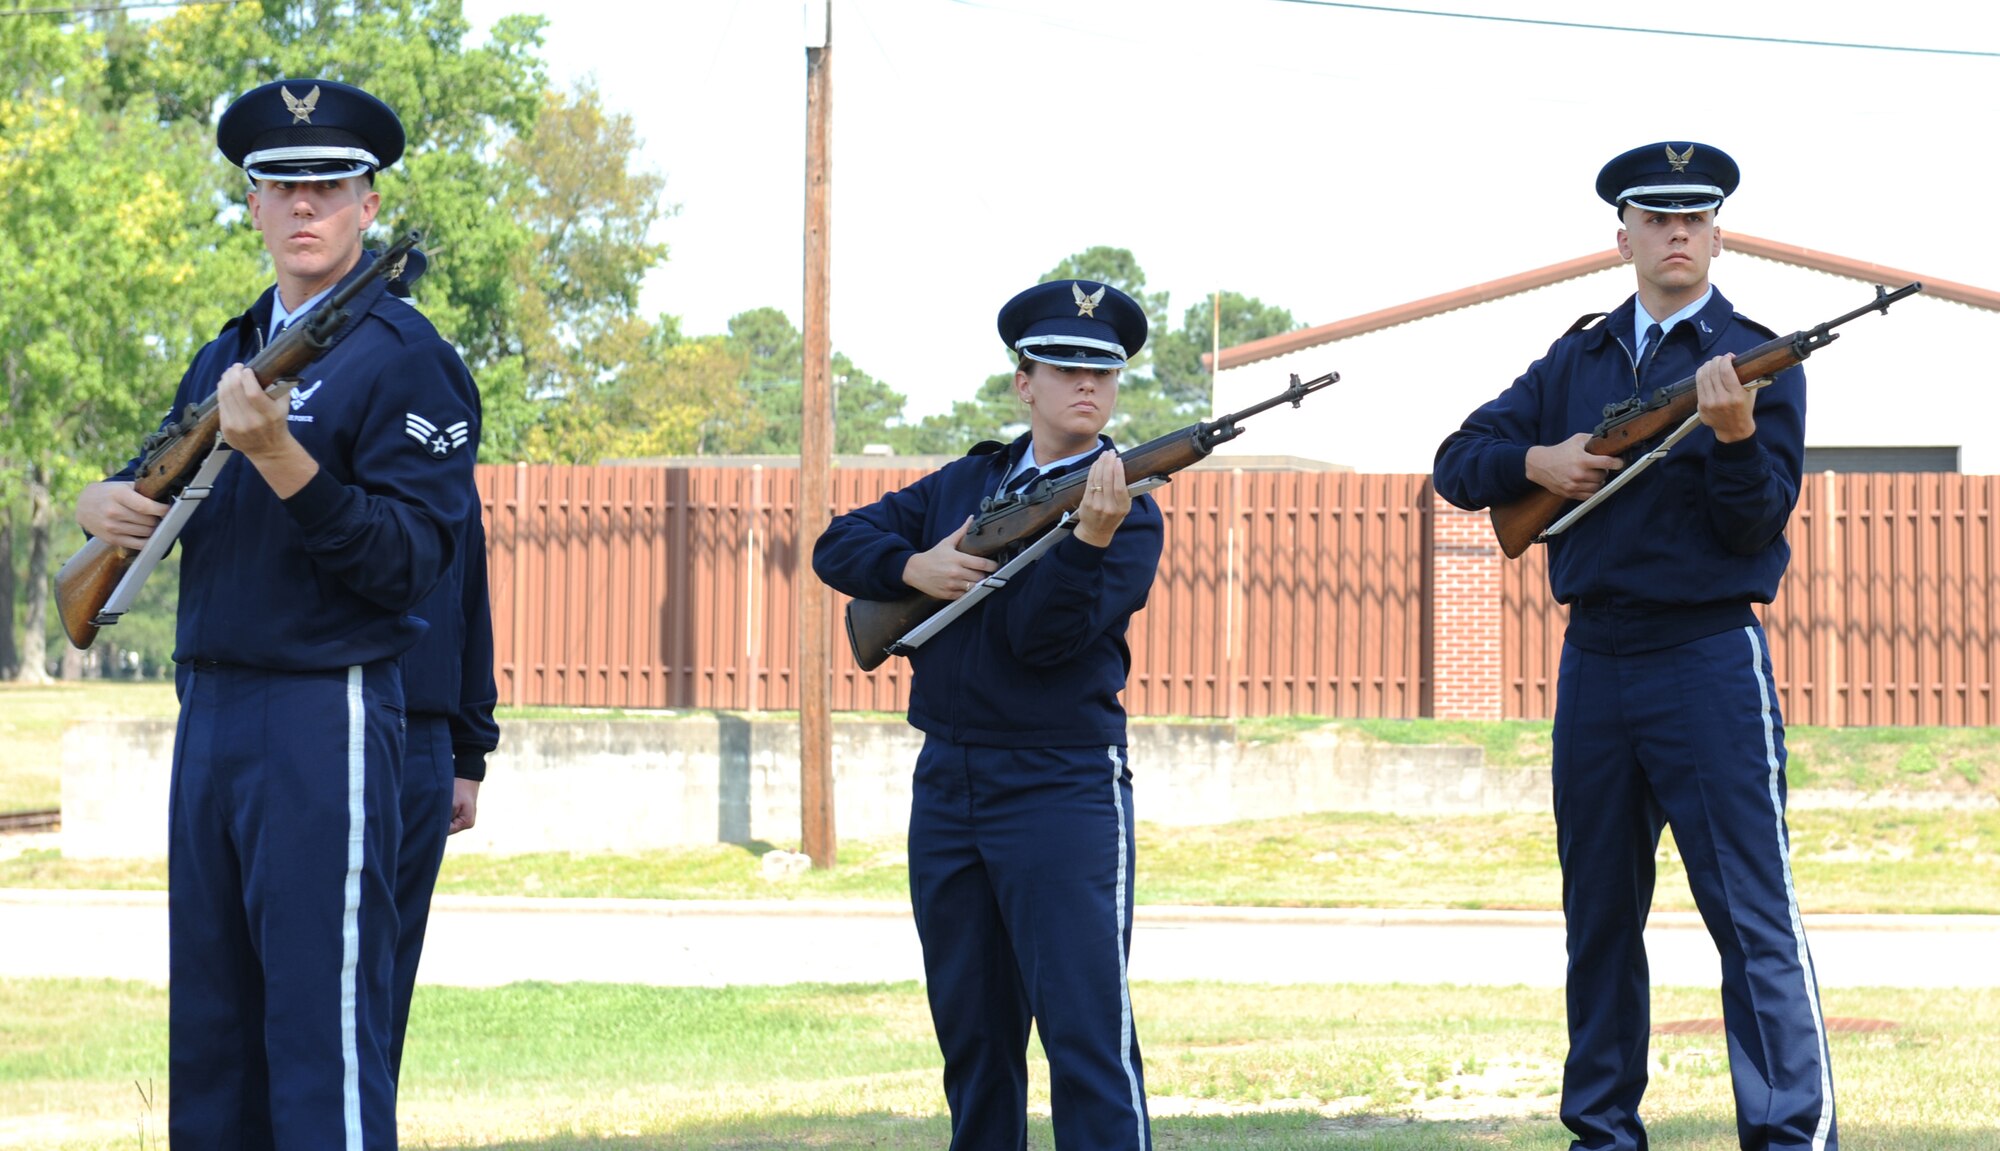 SEYMOUR JOHNSON AIR FORCE BASE, N.C.- Airman 1st Class Jason Hochsprung, Senior Airman Tiffany Legree, and Senior Airman Hoston Kirkeide, members of the firing party, fire their guns as part of a drill practice June 24. The drill practices are an integral part of ensure base honor guard members are prepared to conduct a flawless performance. (U.S. Air Force photo by Airman 1st Class Whitney Stanfield)